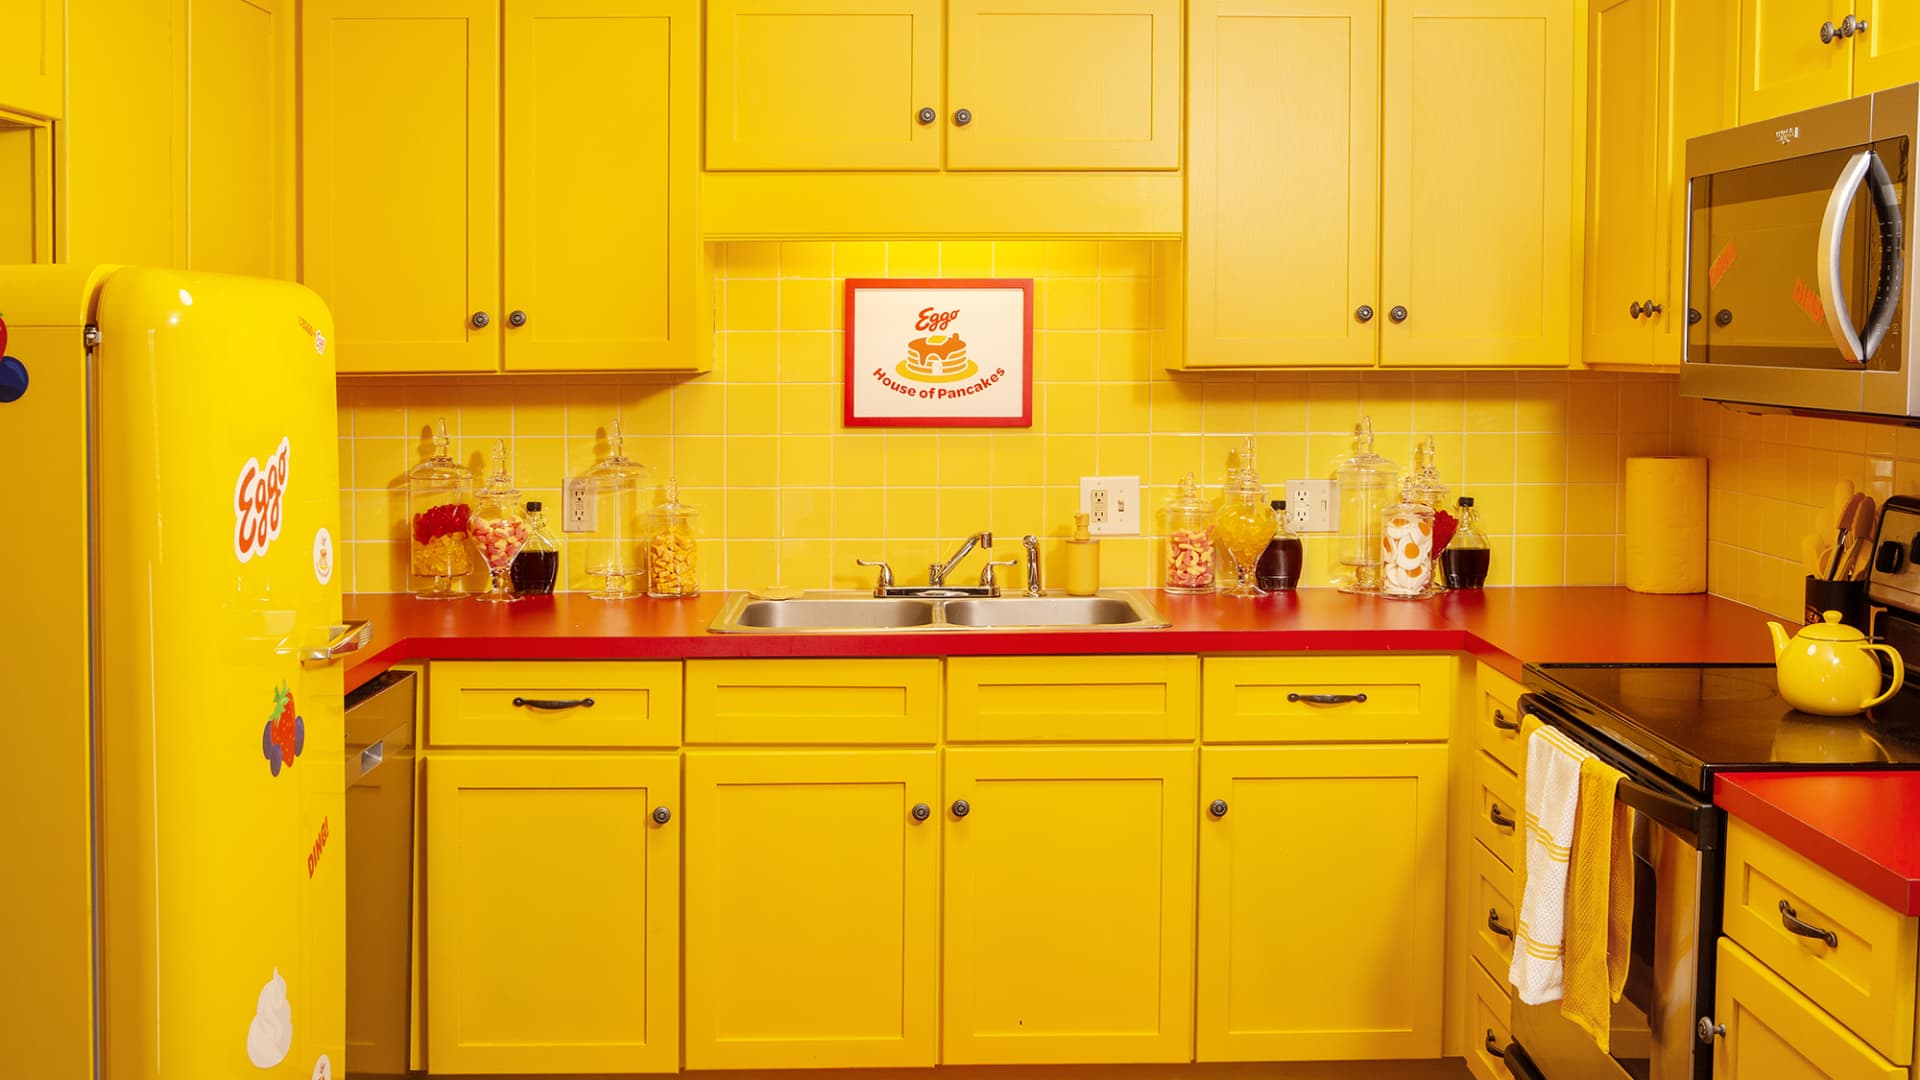 The kitchen at the Eggo House of Pancakes comes stocked with an assortment of the brand's products.